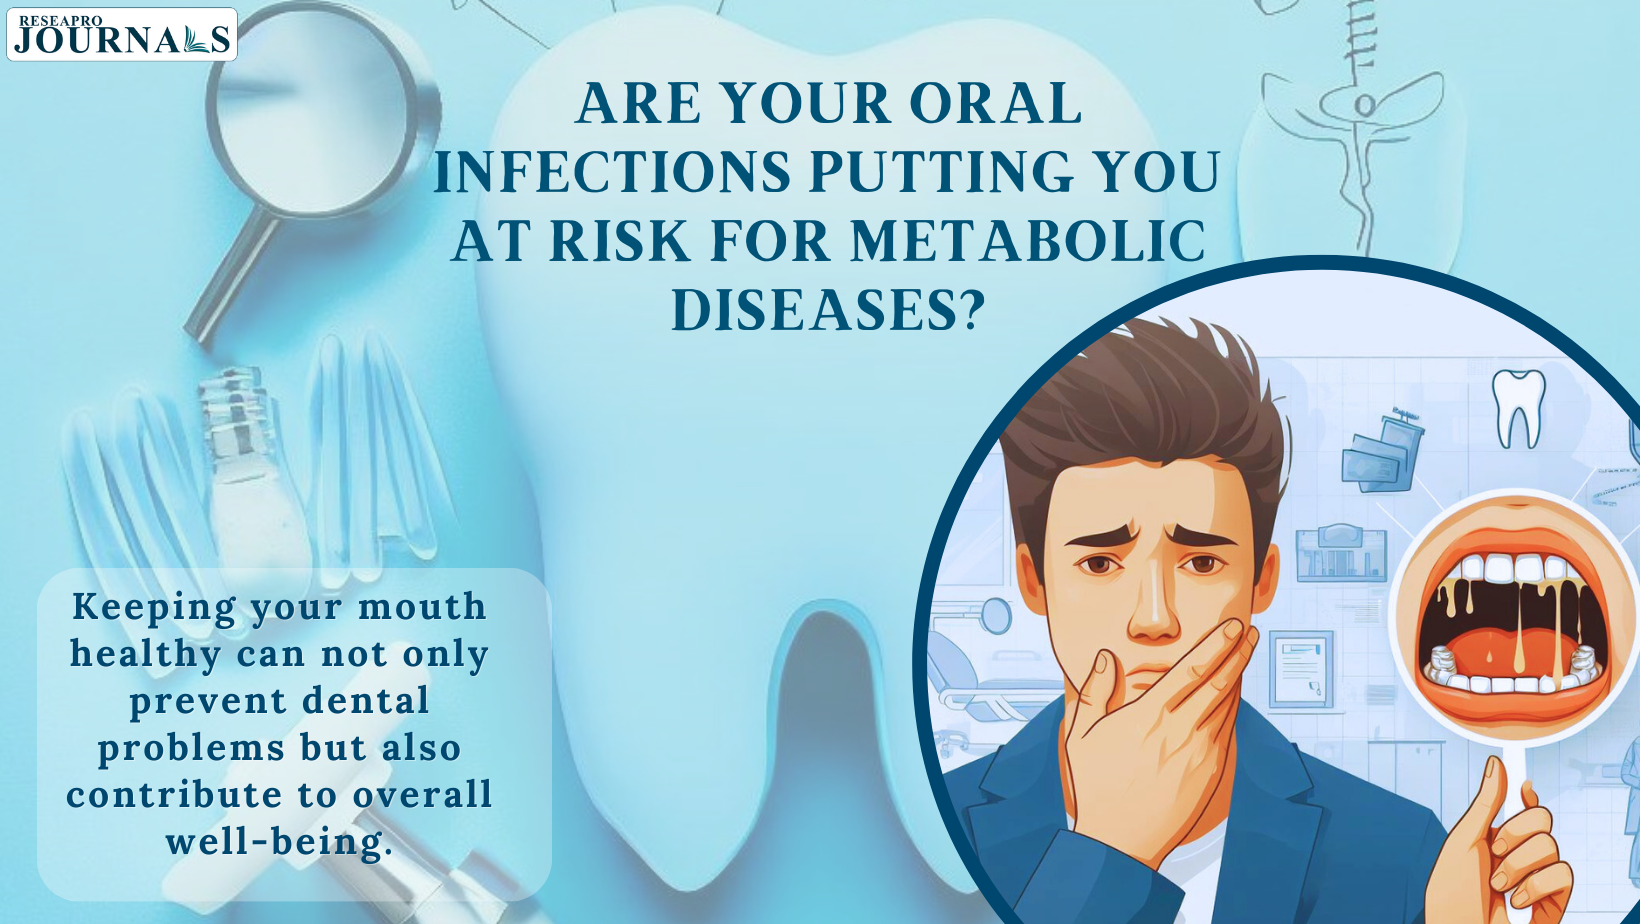 Are Your Oral Infections Putting You at Risk for Metabolic Diseases?